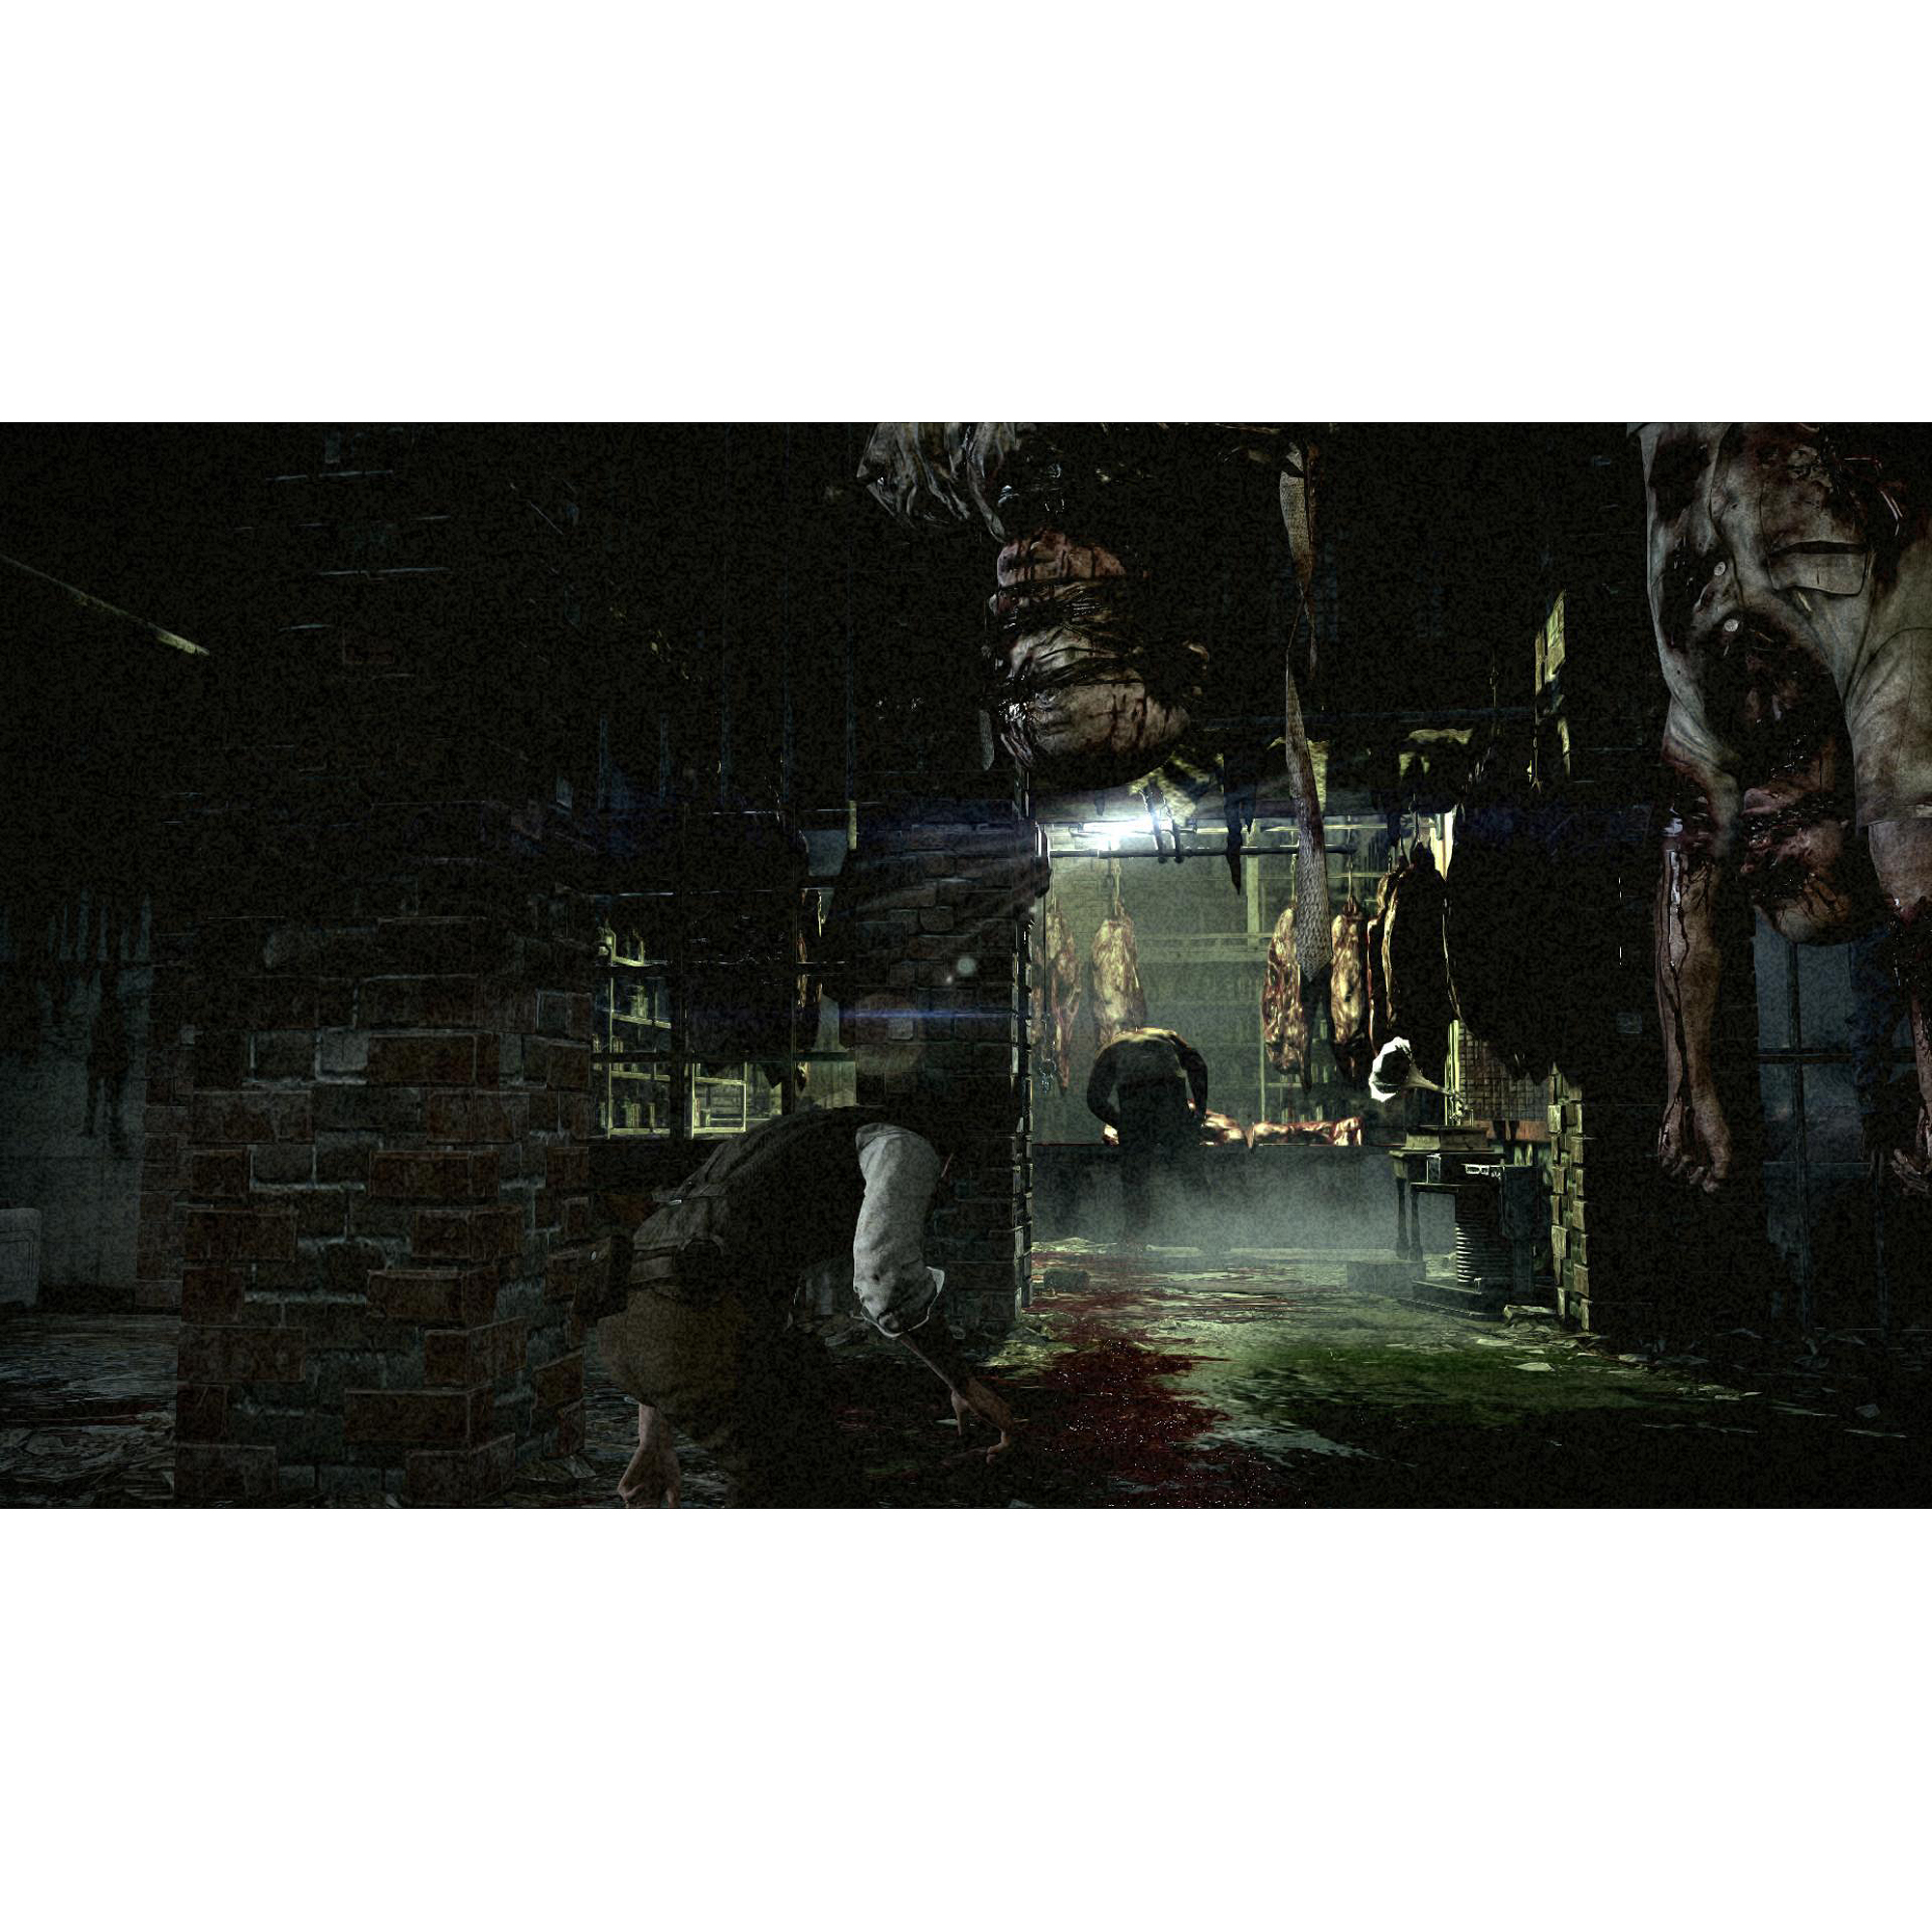 The Evil Within, Bethesda Softworks, Xbox One, [Physical], 93155118539 - image 2 of 5